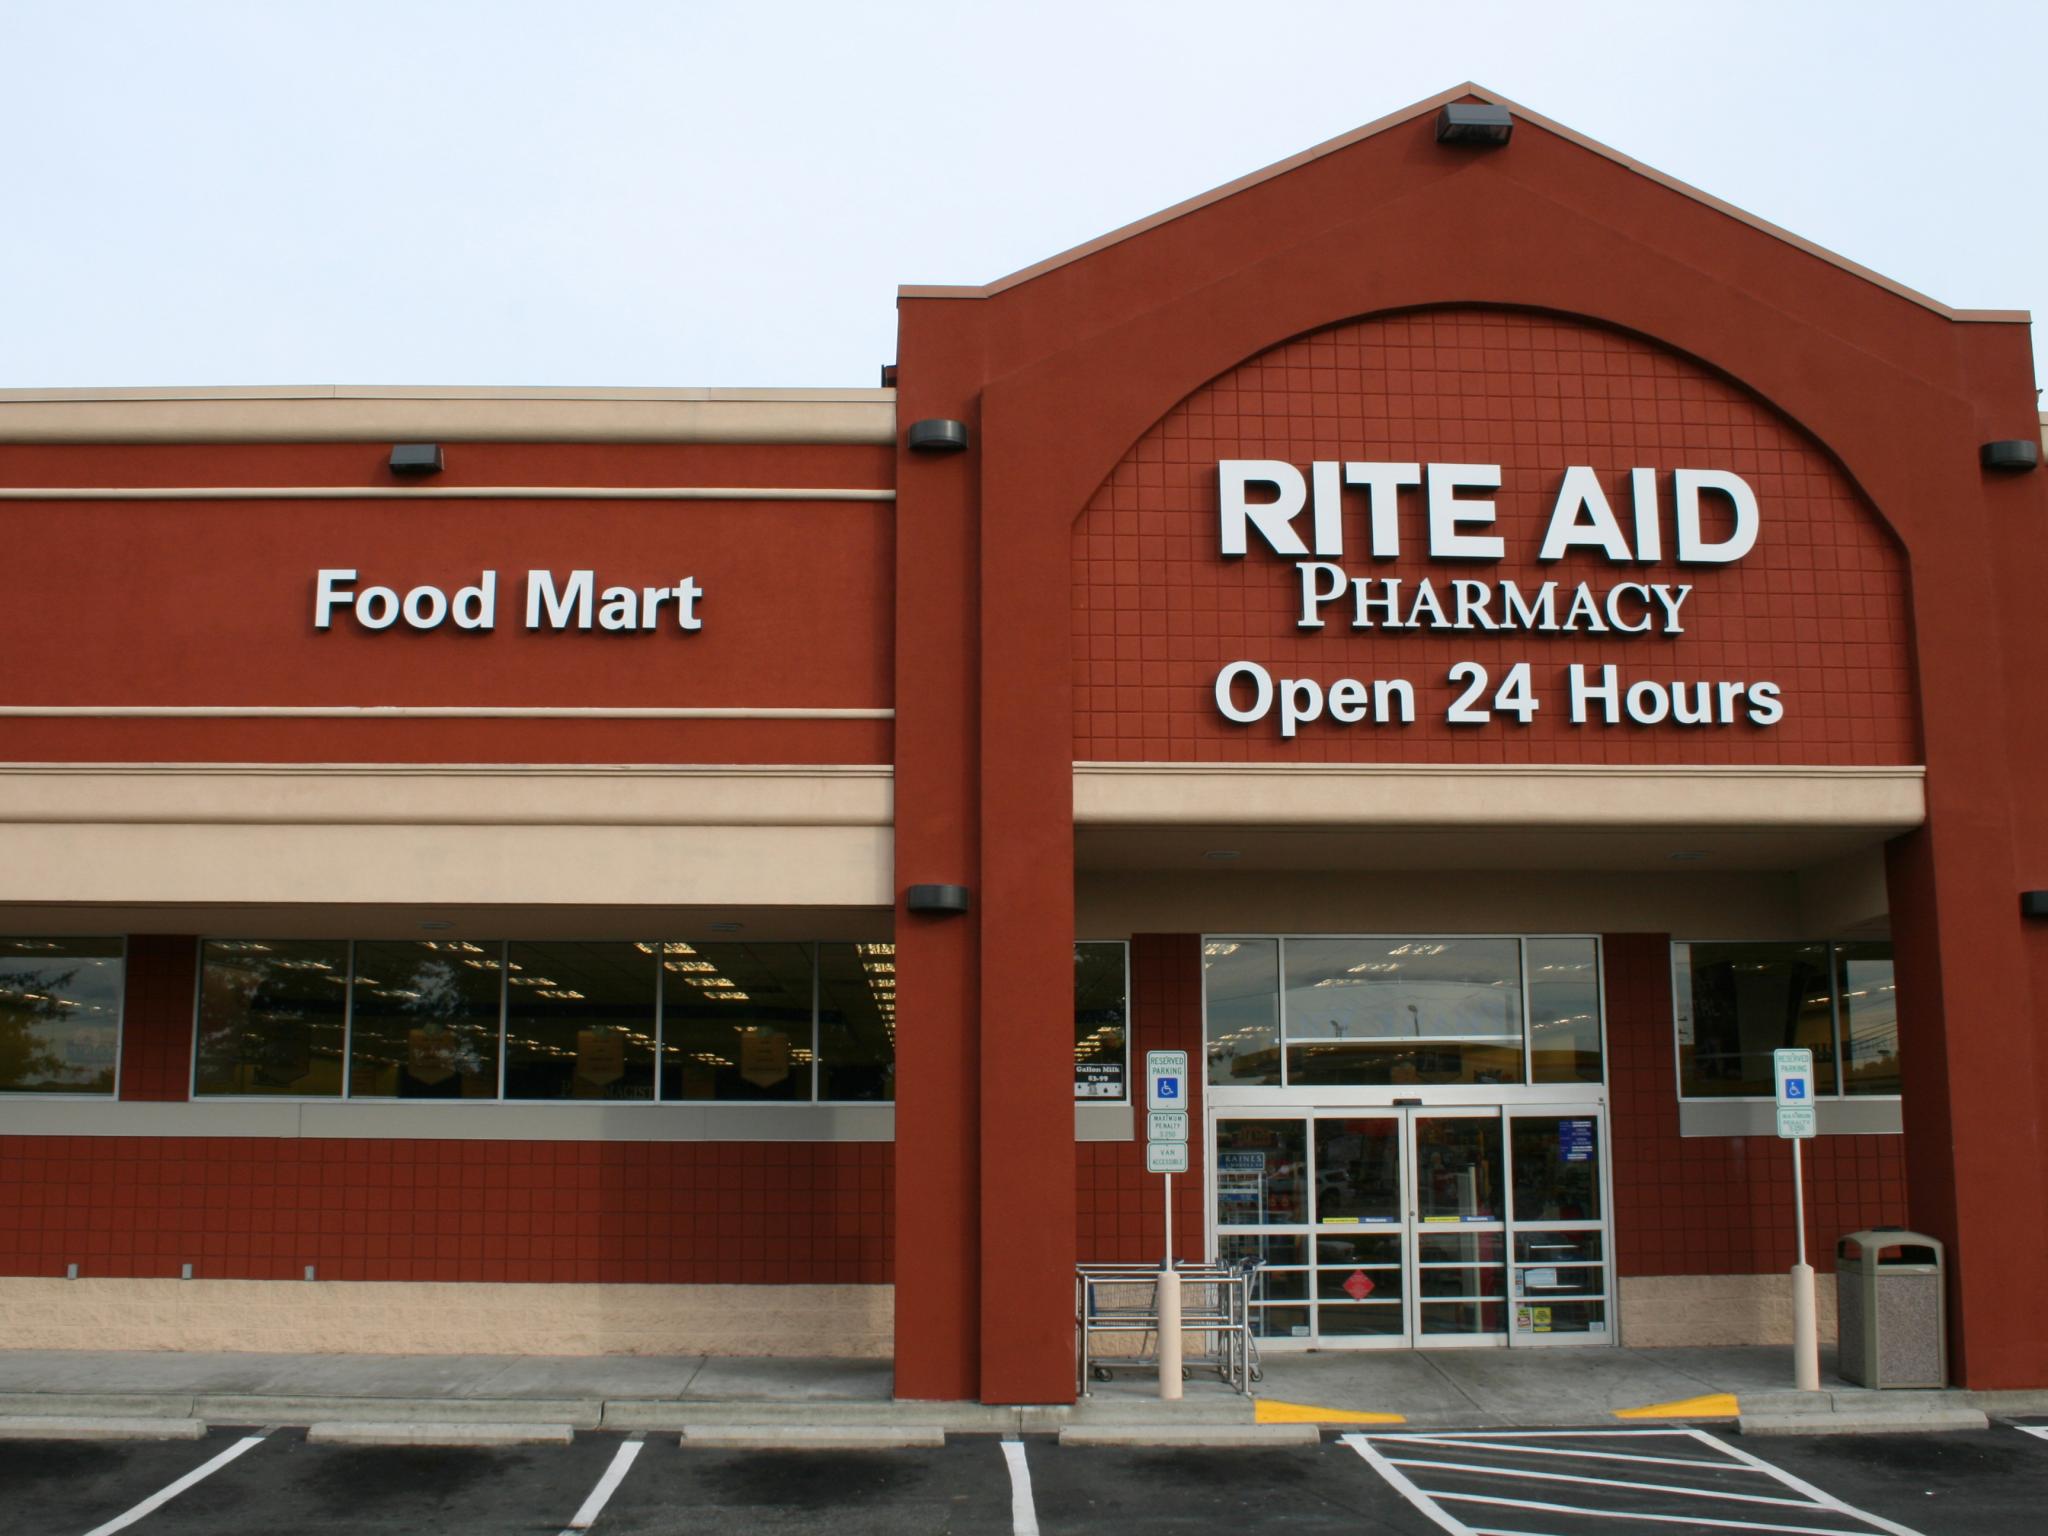  drug-retailer-rite-aid-grappling-with-lawsuits-files-for-bankruptcy 